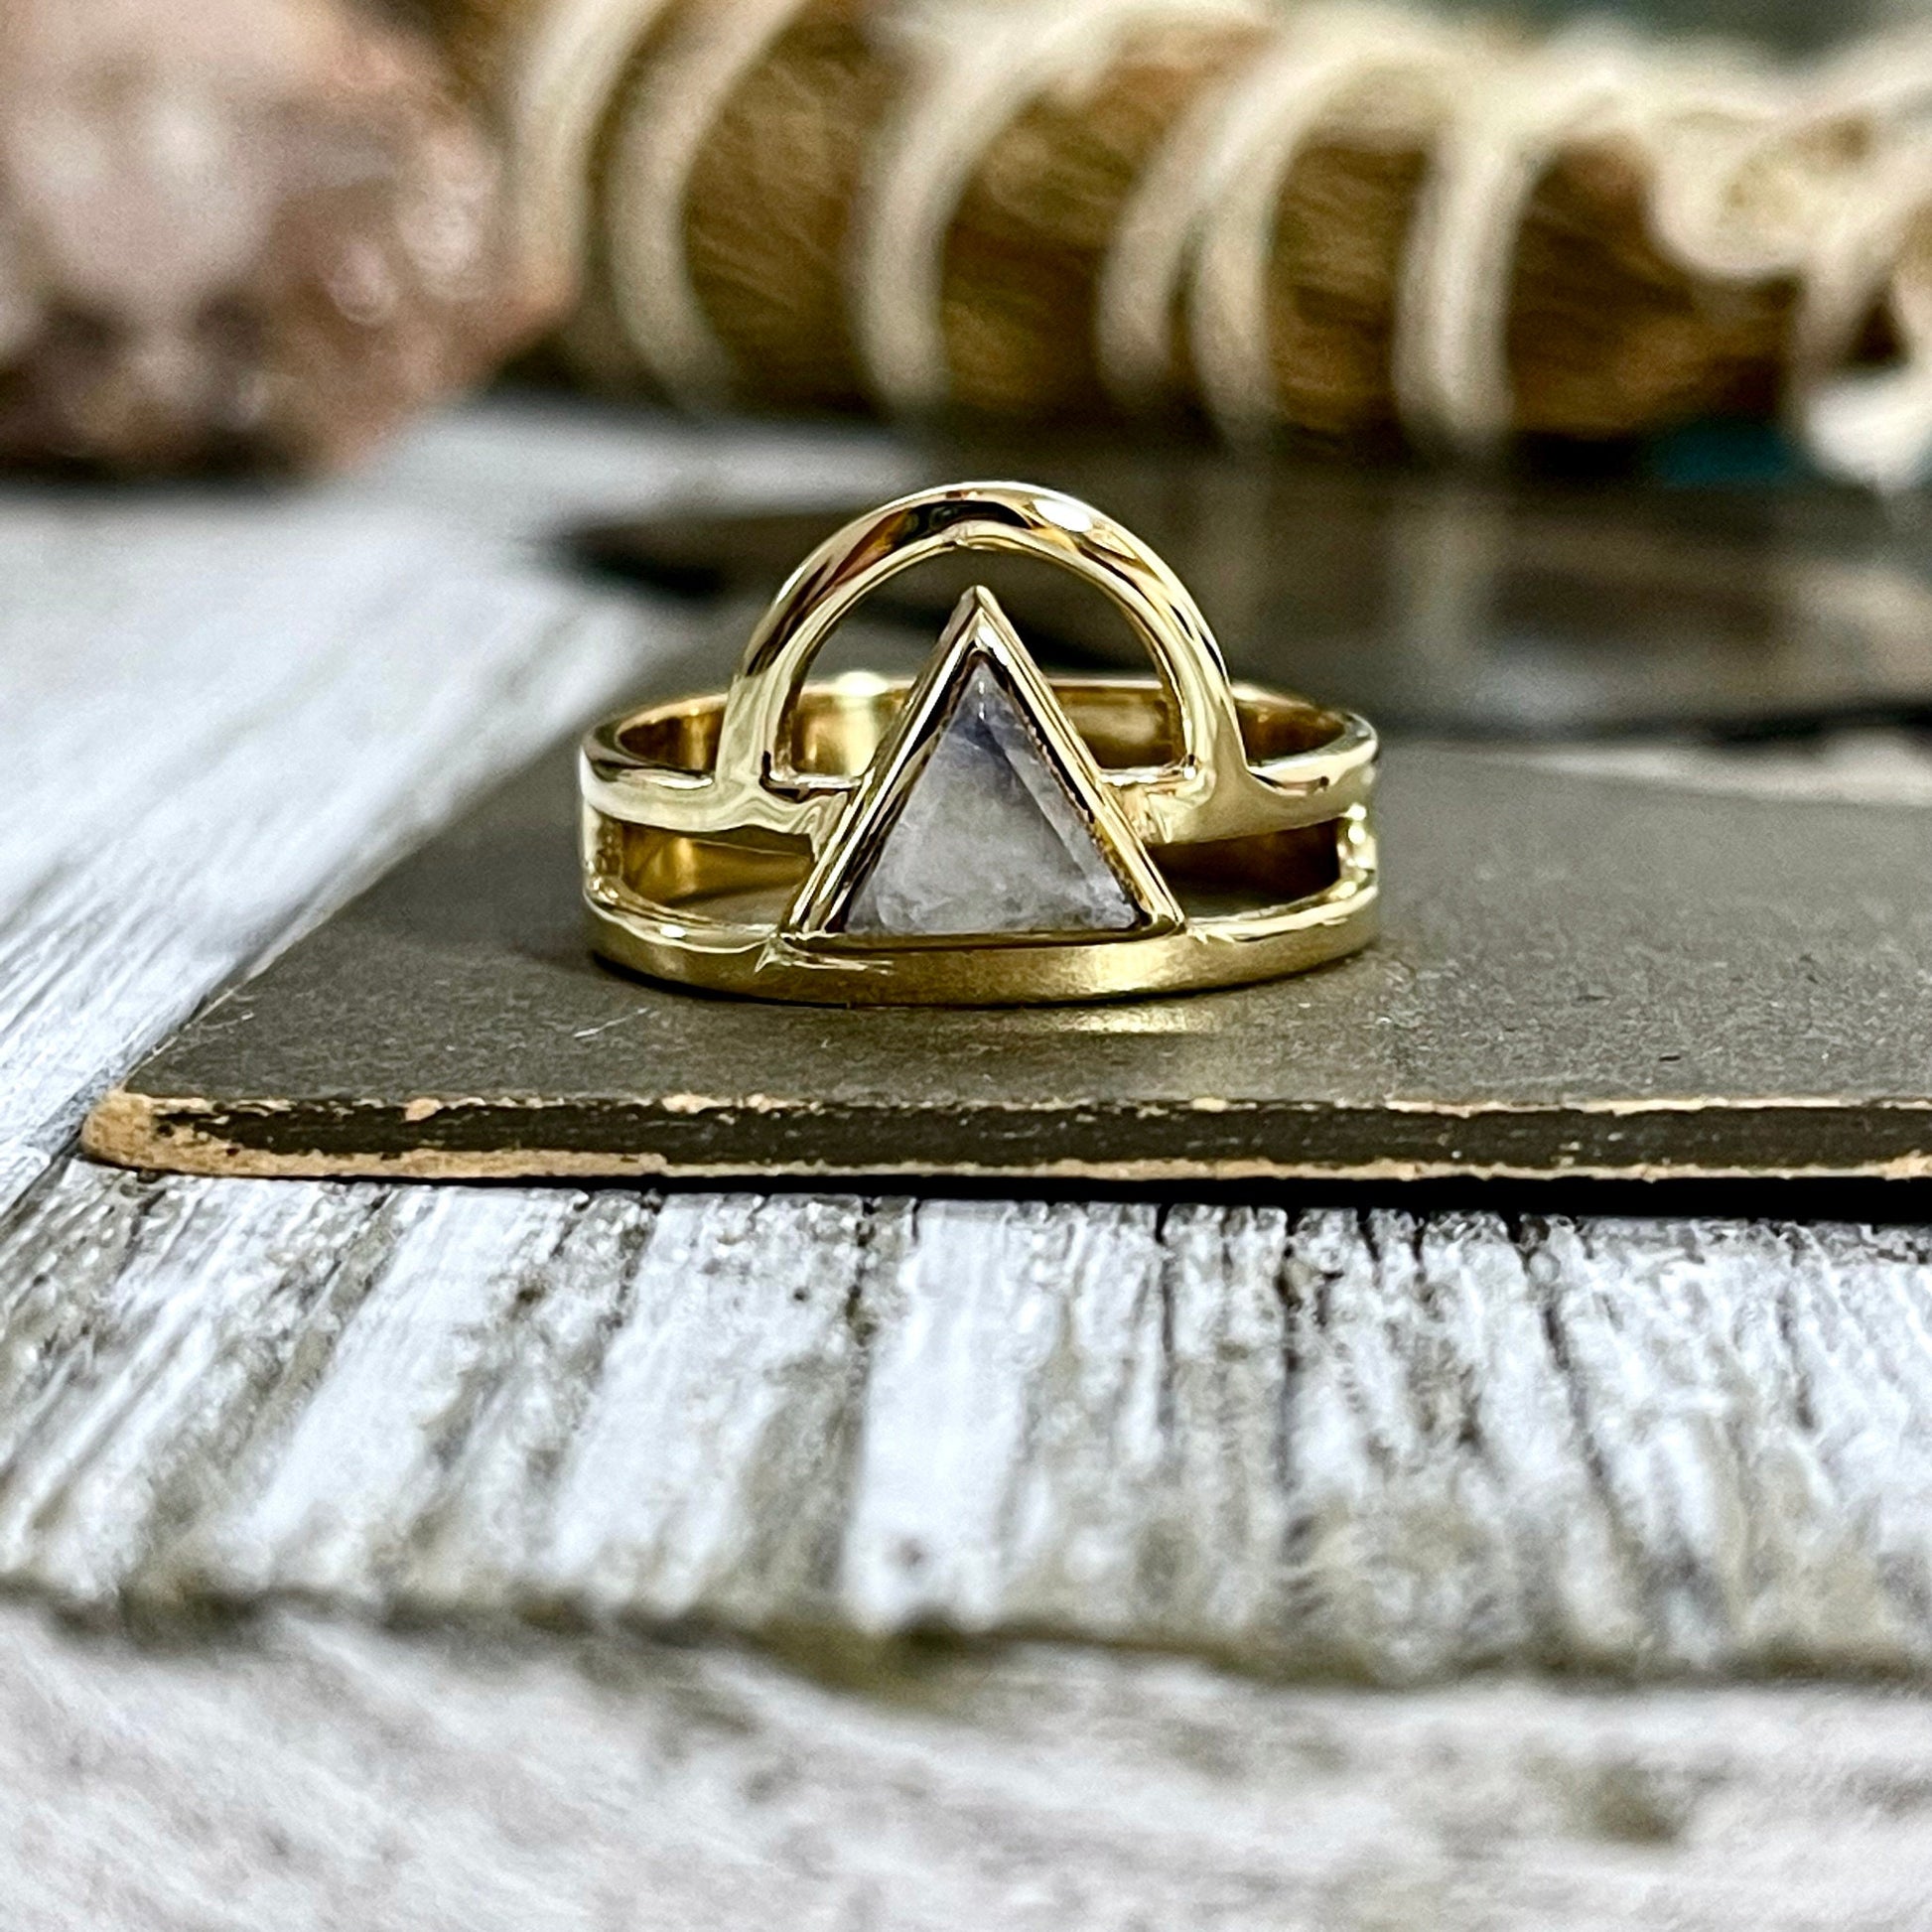 Accessories, Bohemian Ring, Boho Jewelry, Boho Ring, Crystal Ring, Curated- Rings, Etsy Id 1212029929, Etsy ID: 1350095507, Festival Jewelry, Gypsy Ring, Jewelry, Large Crystal, Rainbow Moonstone, Rings, Statement Rings